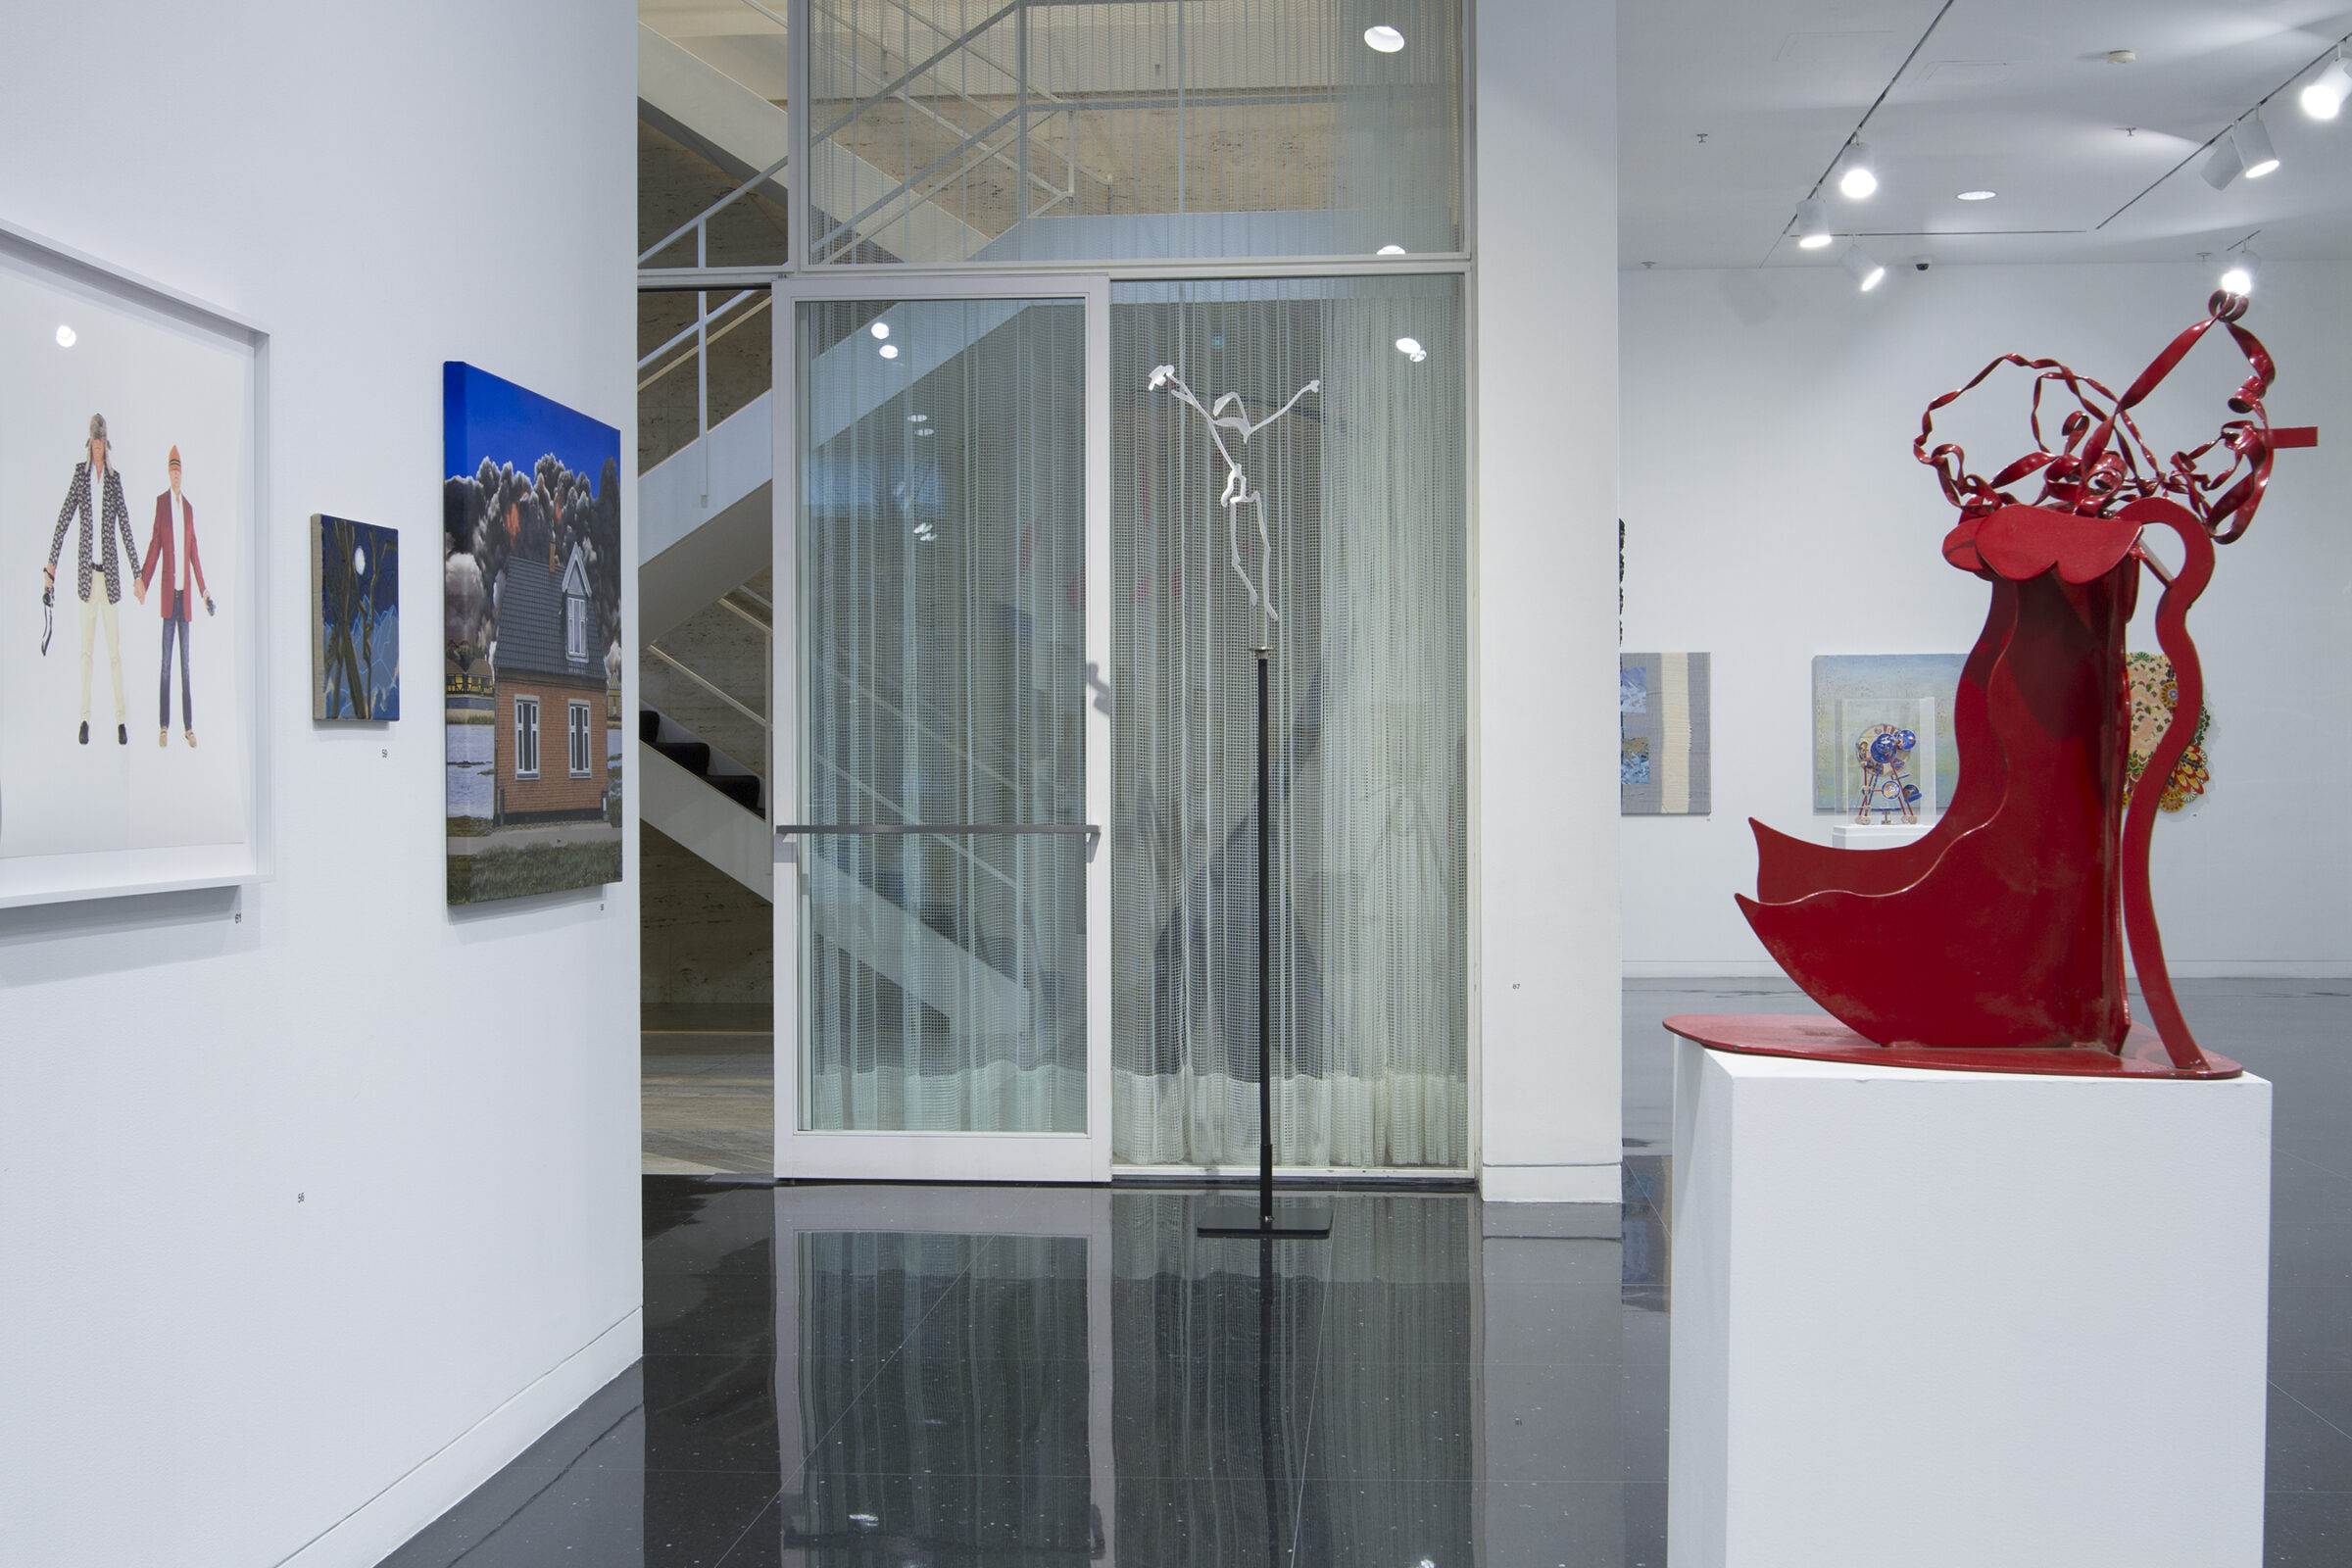 A white gallery space in which a red steel sculpture of an abstract human form sits on a white pedestal across from a framed photograph and a painting of a house. In the distance, a white, wire sculpture is installed to appear balancing on a tall, thin pedestal. The Mies van der Rohe stairwell is also visible.